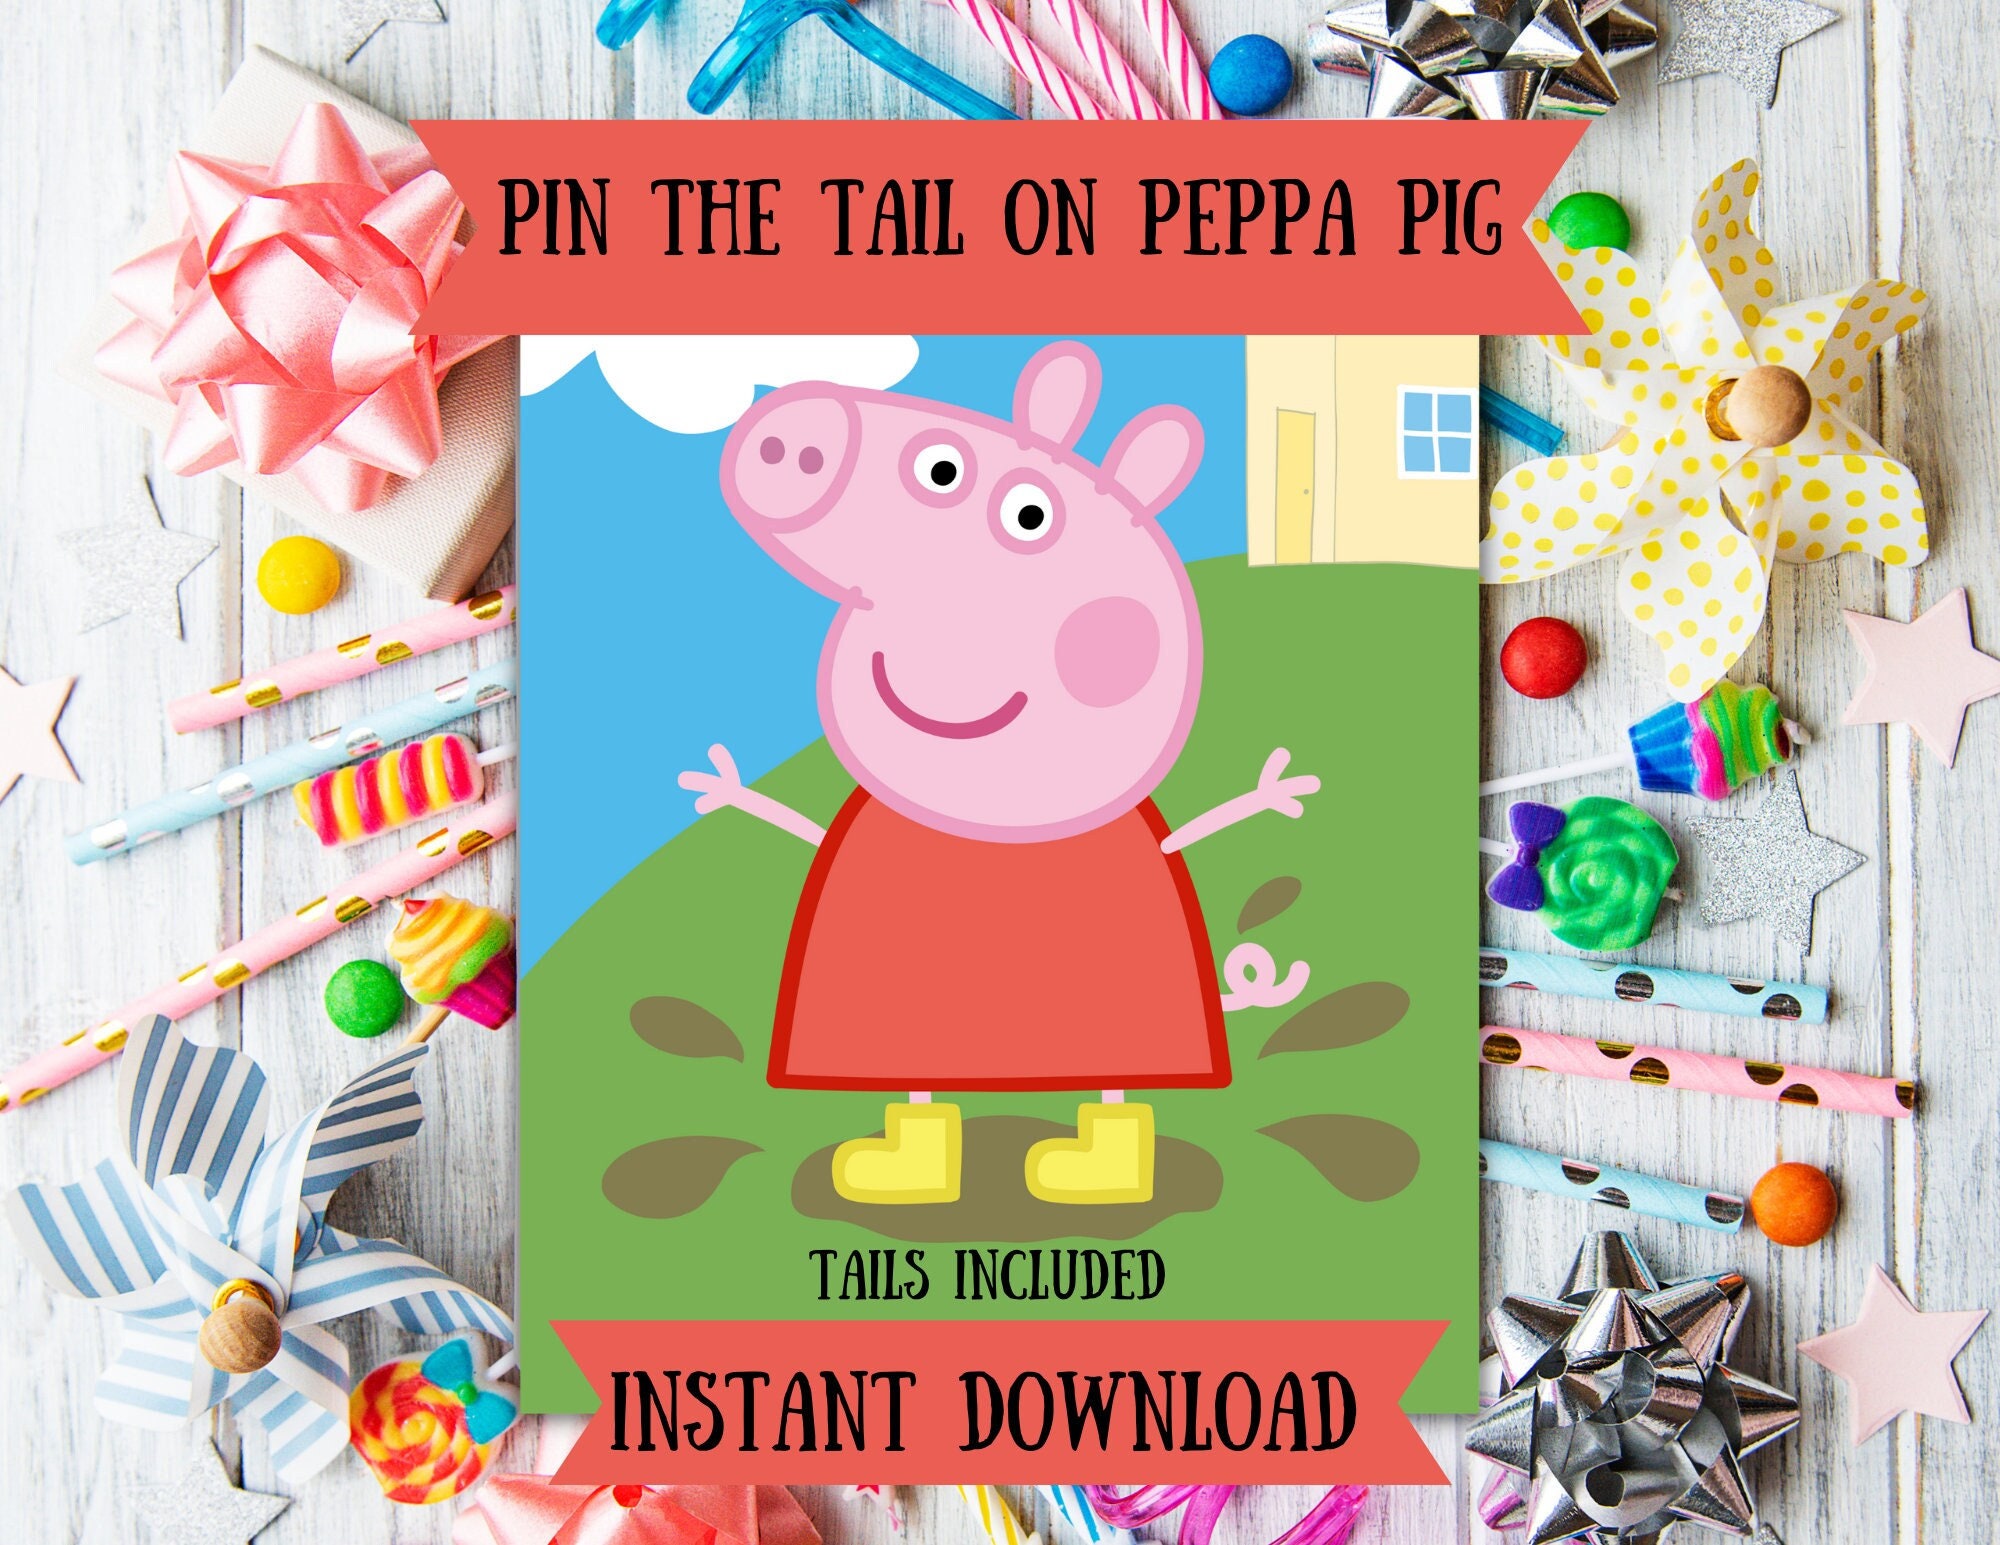 Treasures Gifted Officially Licensed Peppa Pig Birthday Party Supplies -  Serves 16 Guests, Dinnerware Deluxe Set Peppa Pig Party Supplies, Peppa Pig